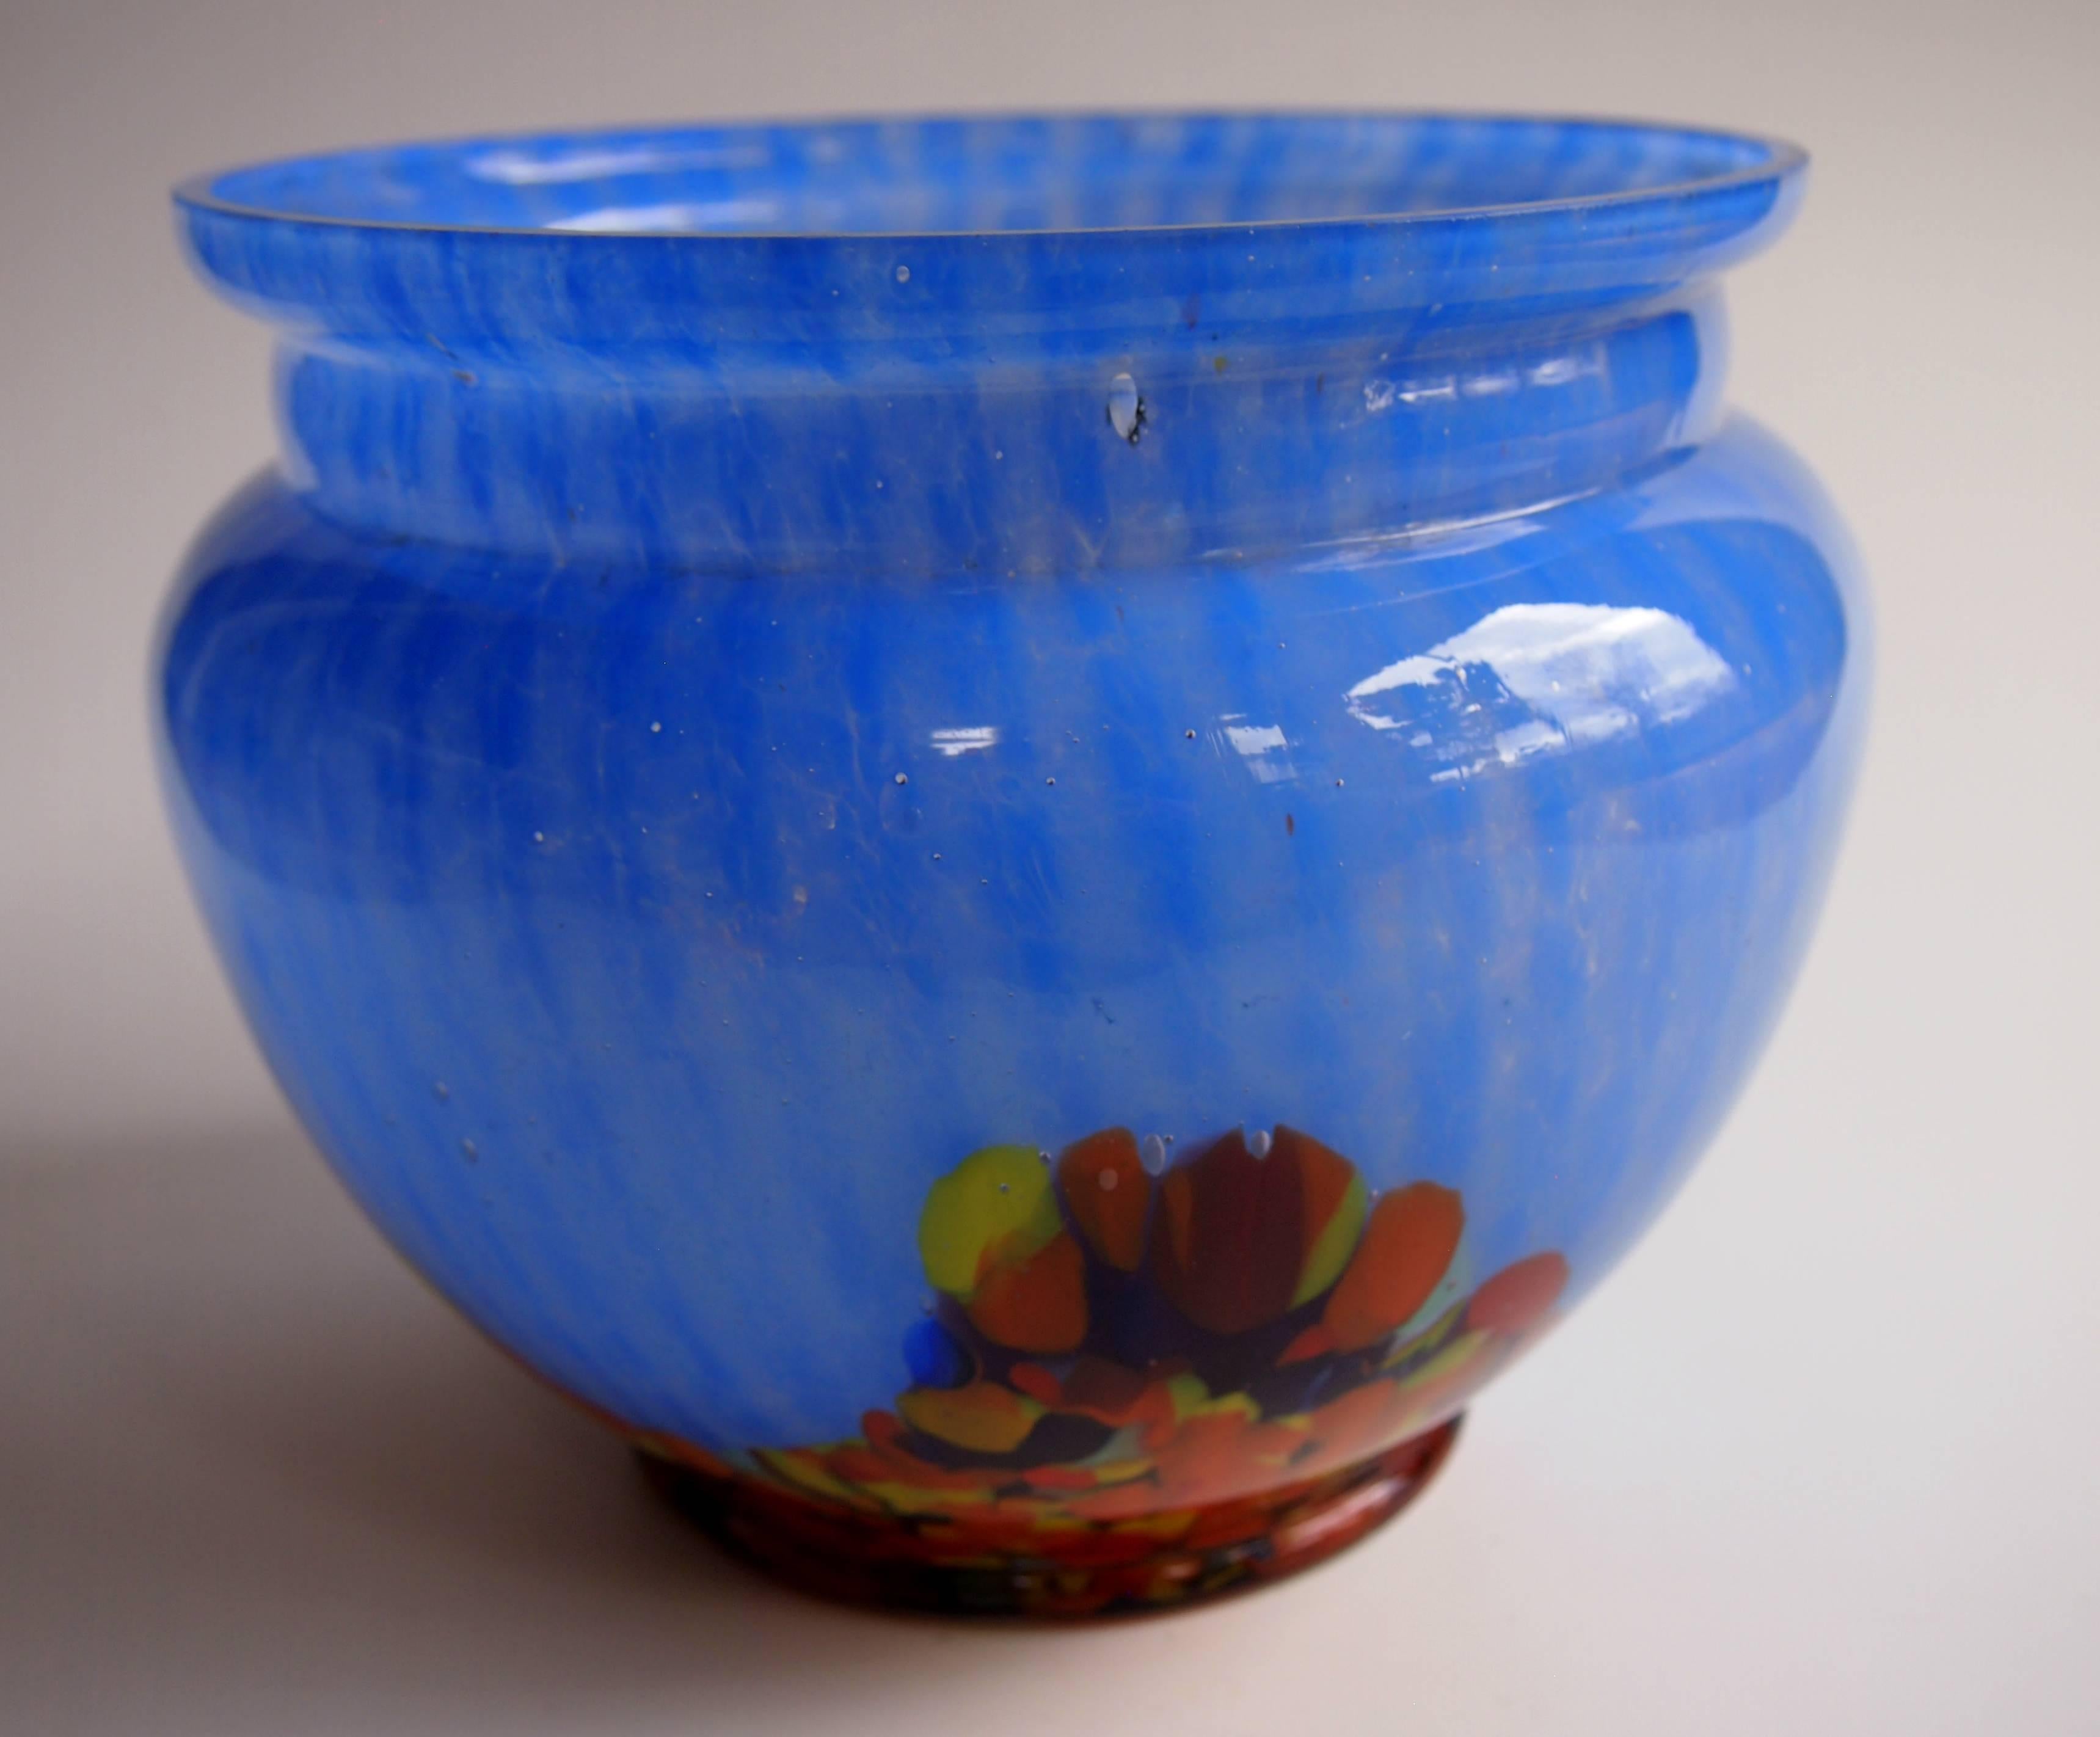 Amazingly rare large Art Deco Josephine -Vineta- Kristall vase/bowl by Erwin Pfohl in vibrant blue with polychrome decorations, circa 1930 form 4257. These very rarely turn up and were probably Josephine's answer to WMF's Ikora glass. They are